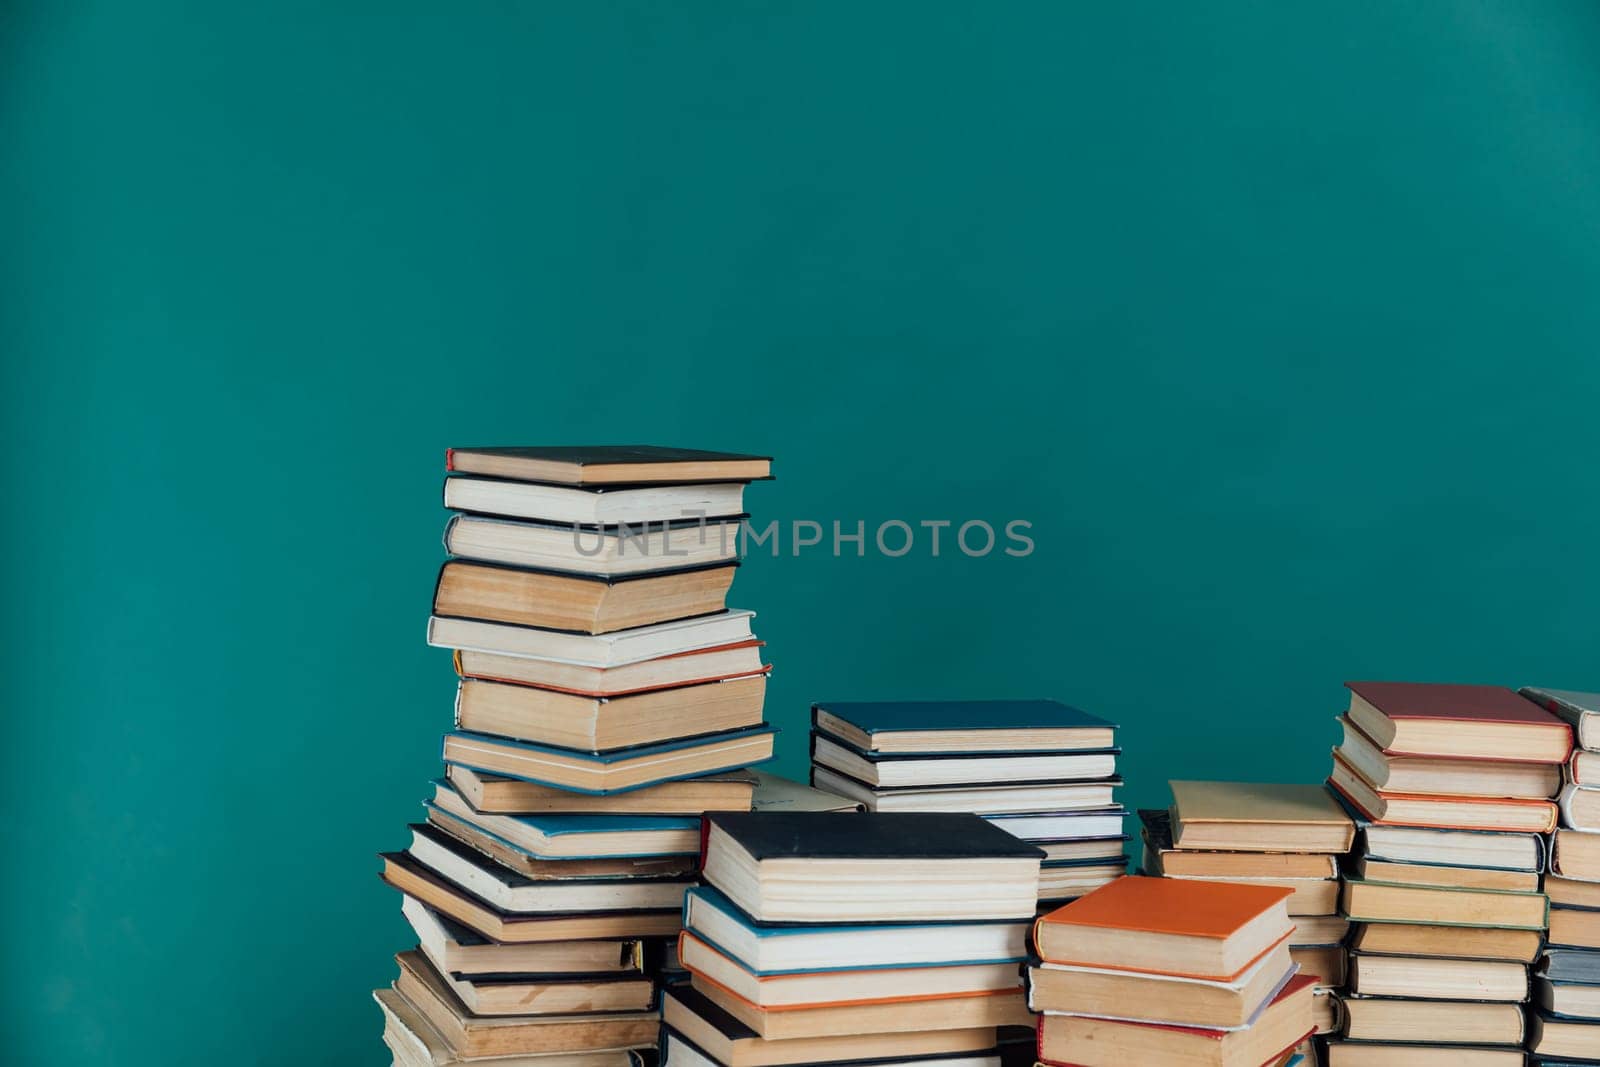 Stacks of books in university library on green background by Simakov